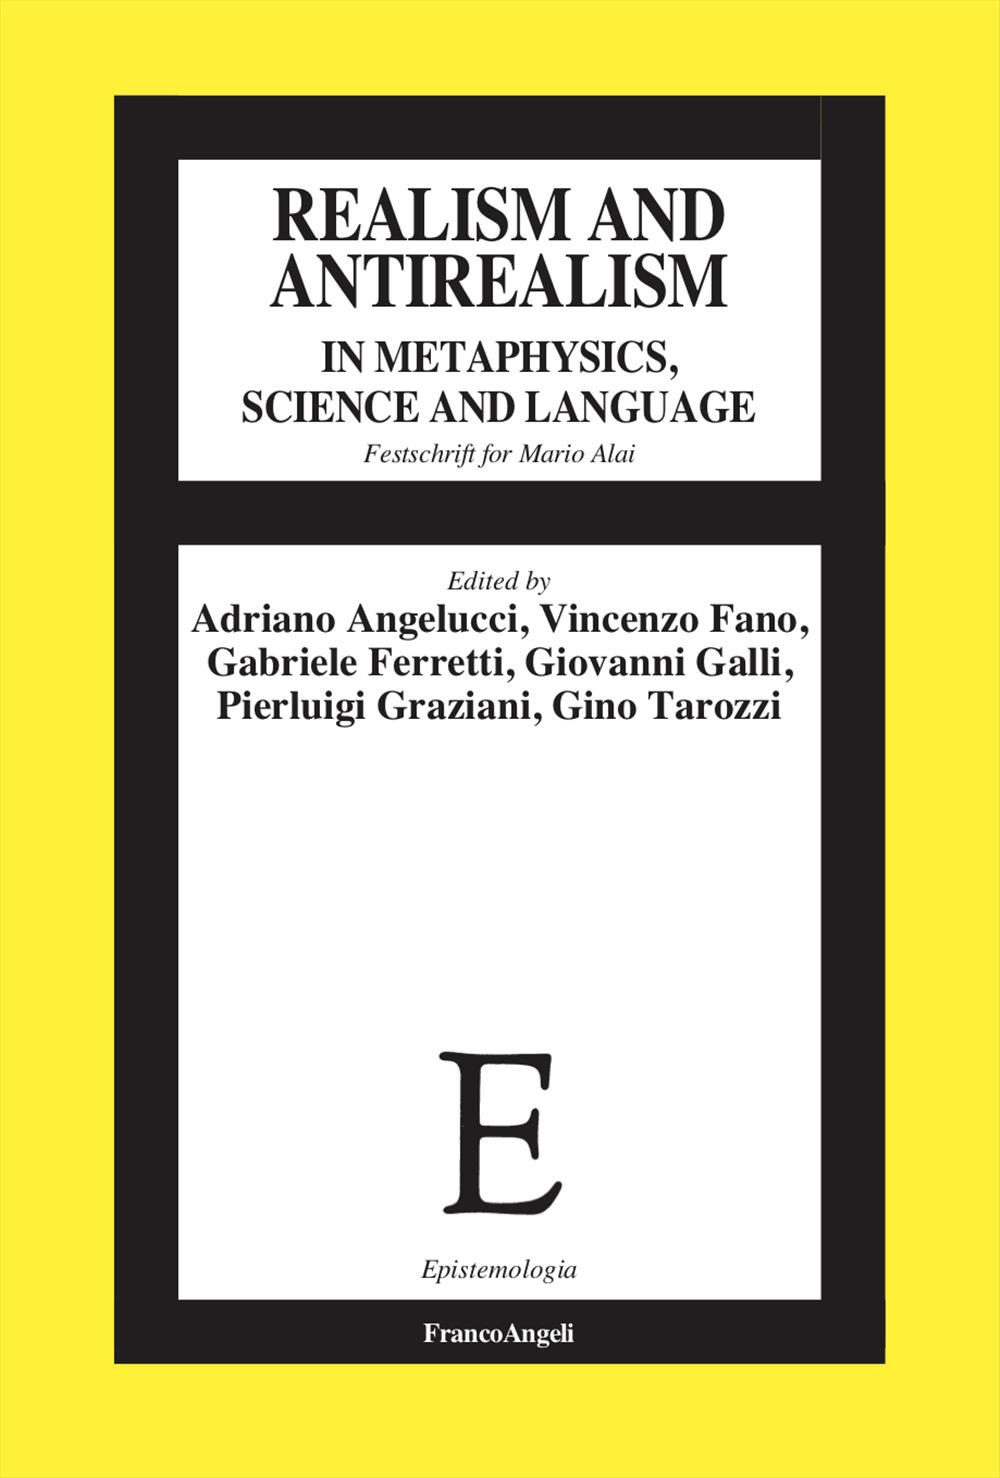 Realism and antirealism in metaphysics, science and language. Festschrift for Mario Alai